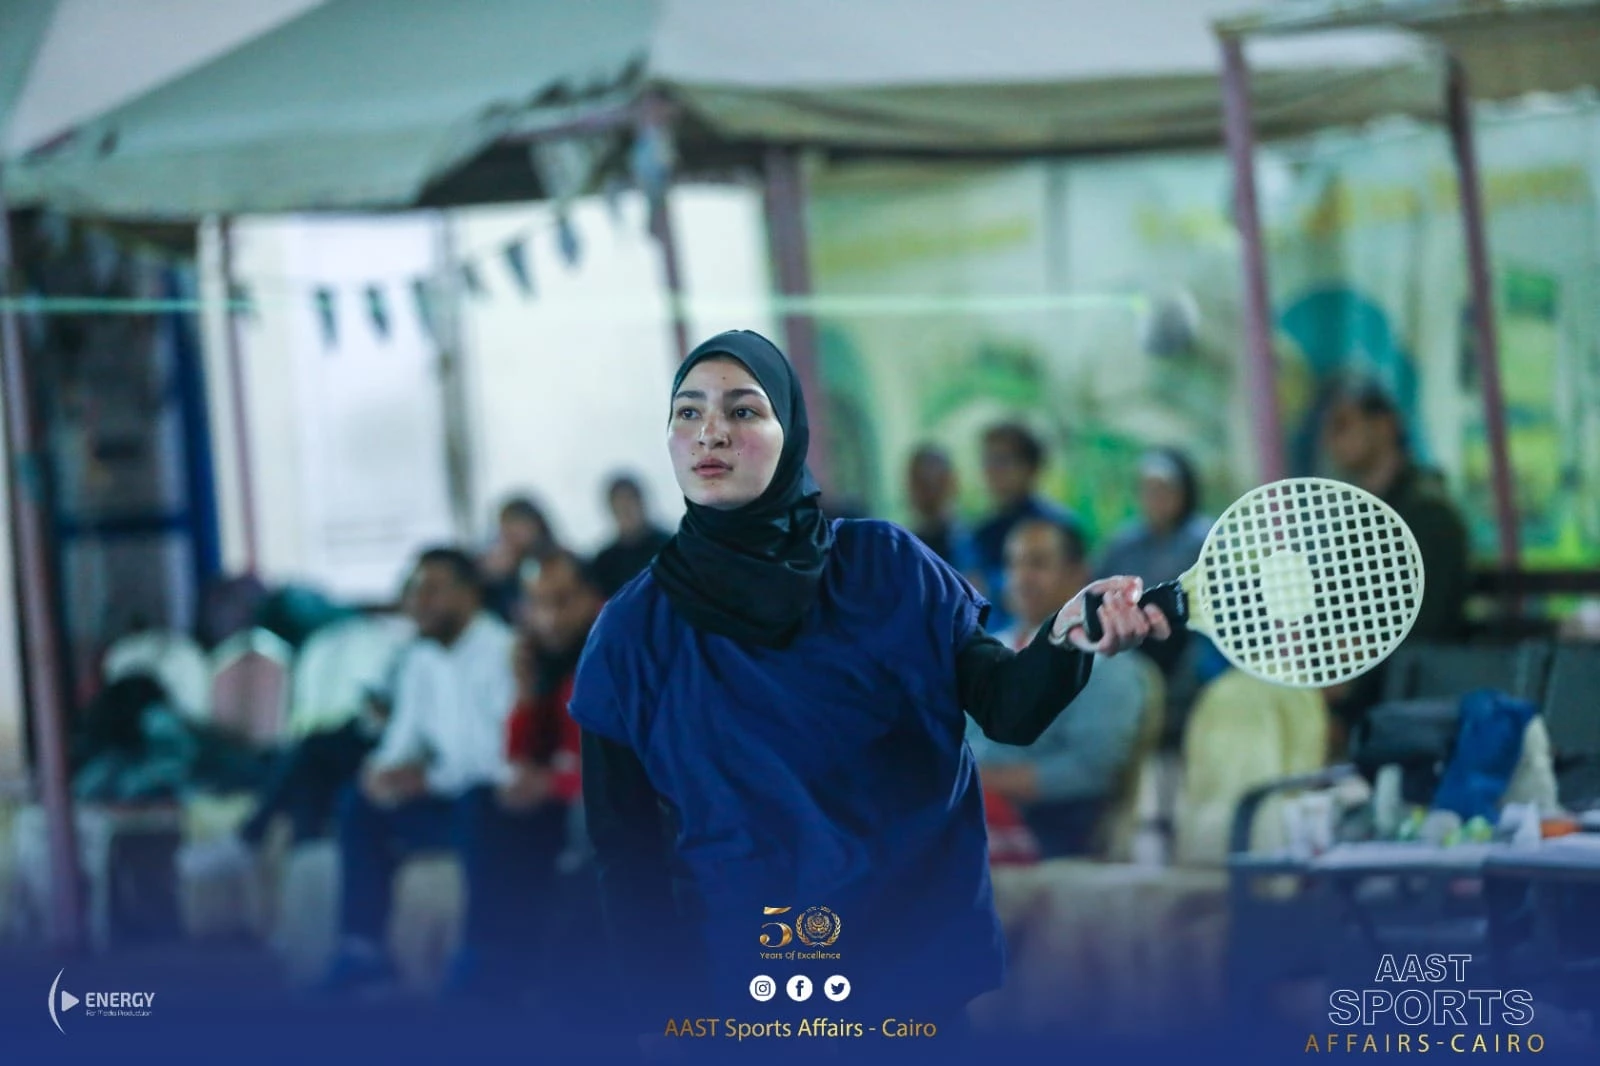 The academy was crowned in Cairo with the first place Cup in the student championship and the first place Cup in the female student championship in the private universities Speedball Championship4